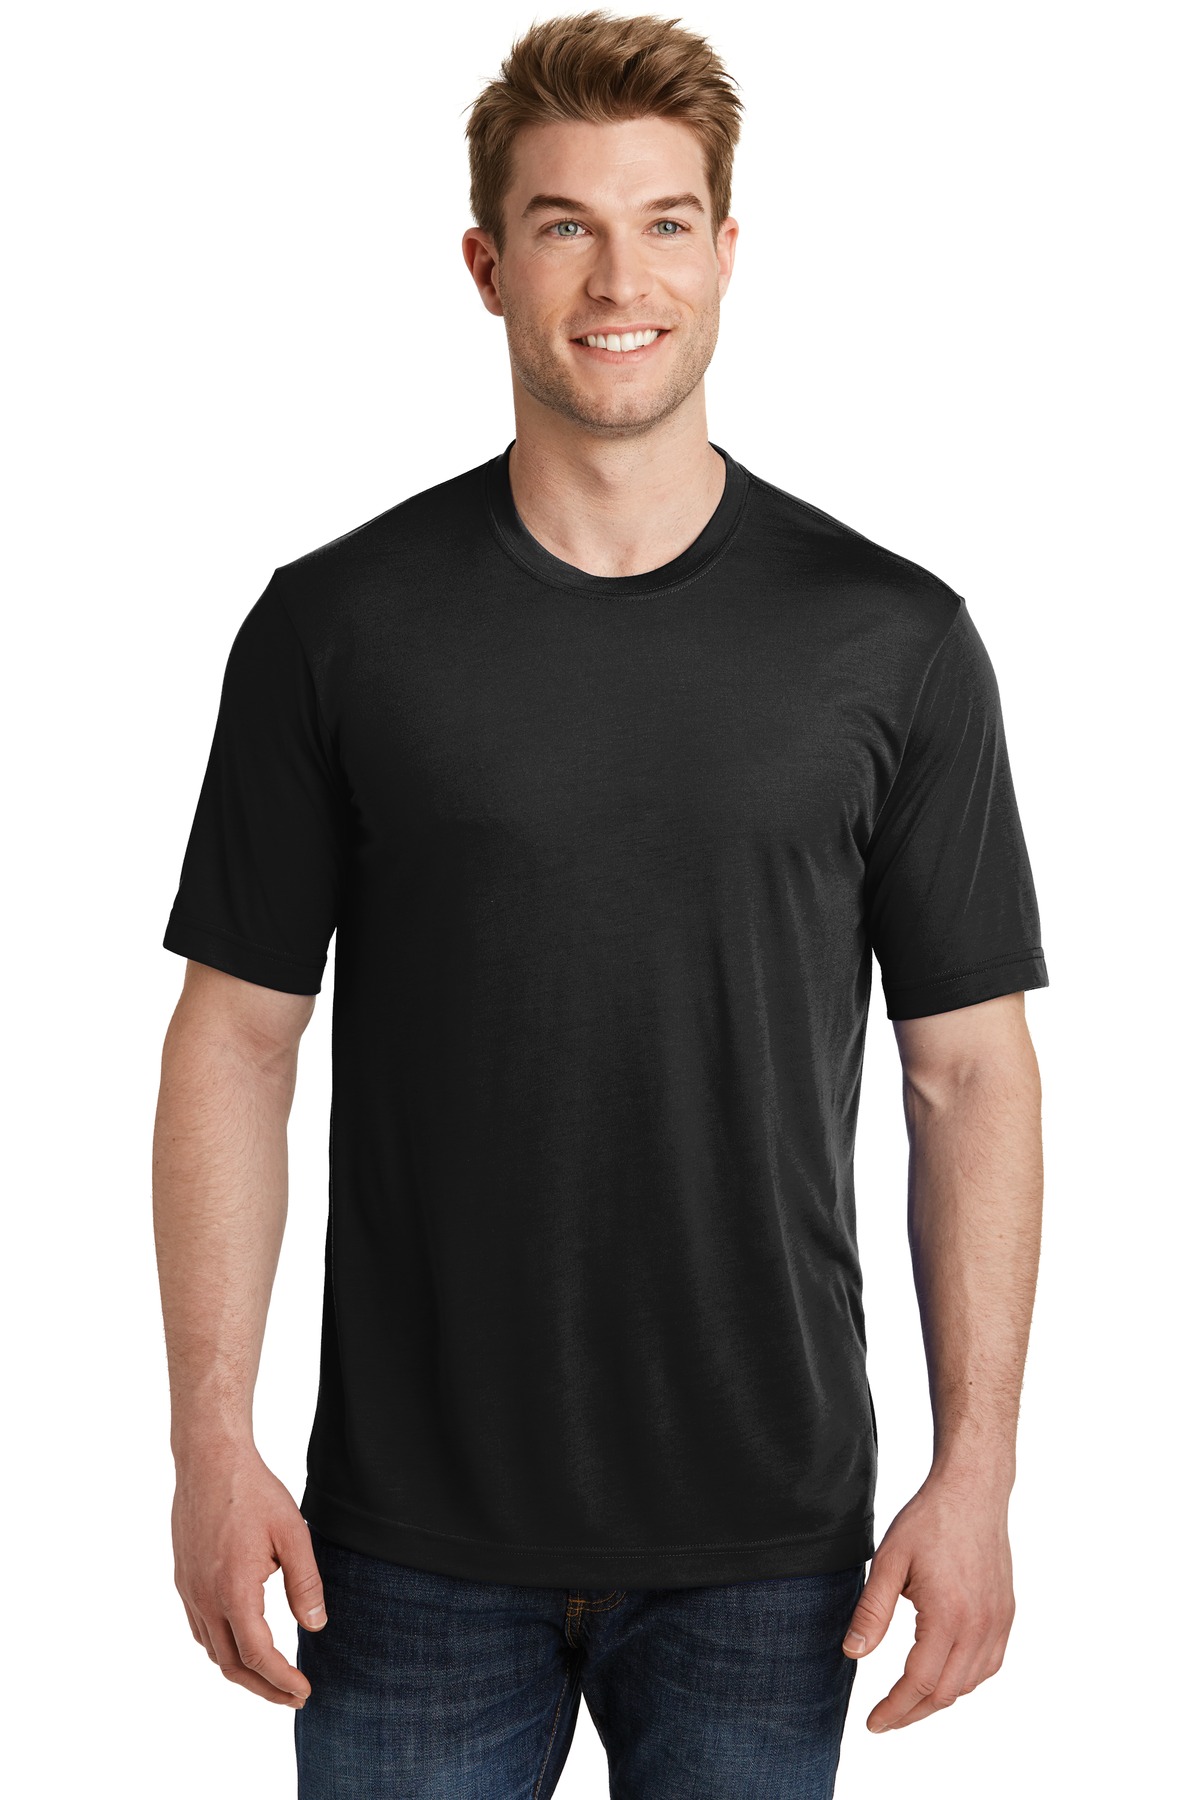 Sport-Tek ® PosiCharge ® Competitor ™ Cotton Touch ™ Tee. ST450 ...